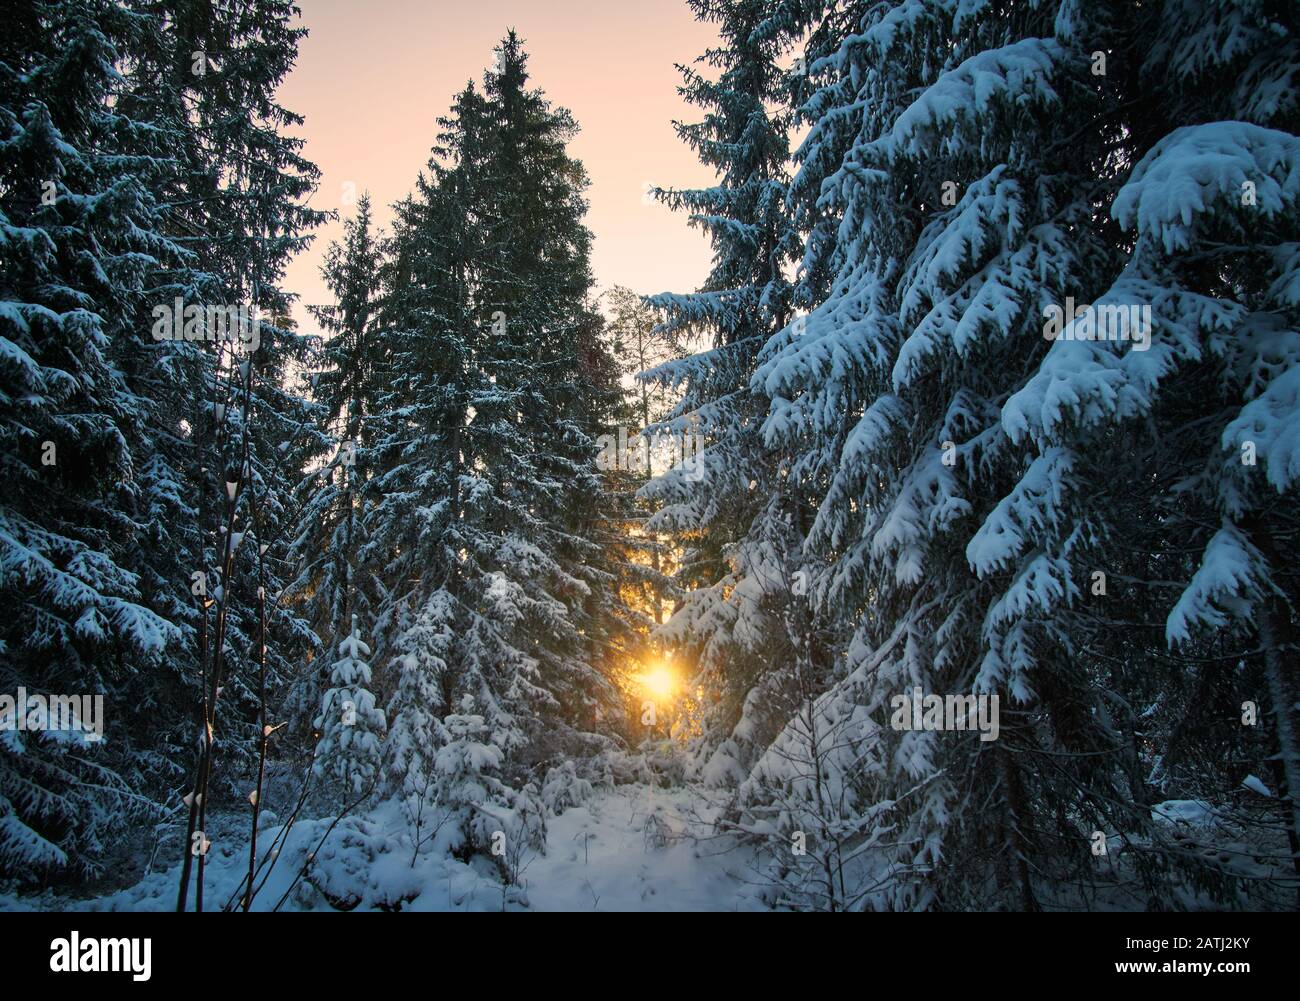 Sun Rays Through Frosty Trees. Dramatic winter wonderland scenery in scenic golden evening light at sunset in Finland. Stock Photo